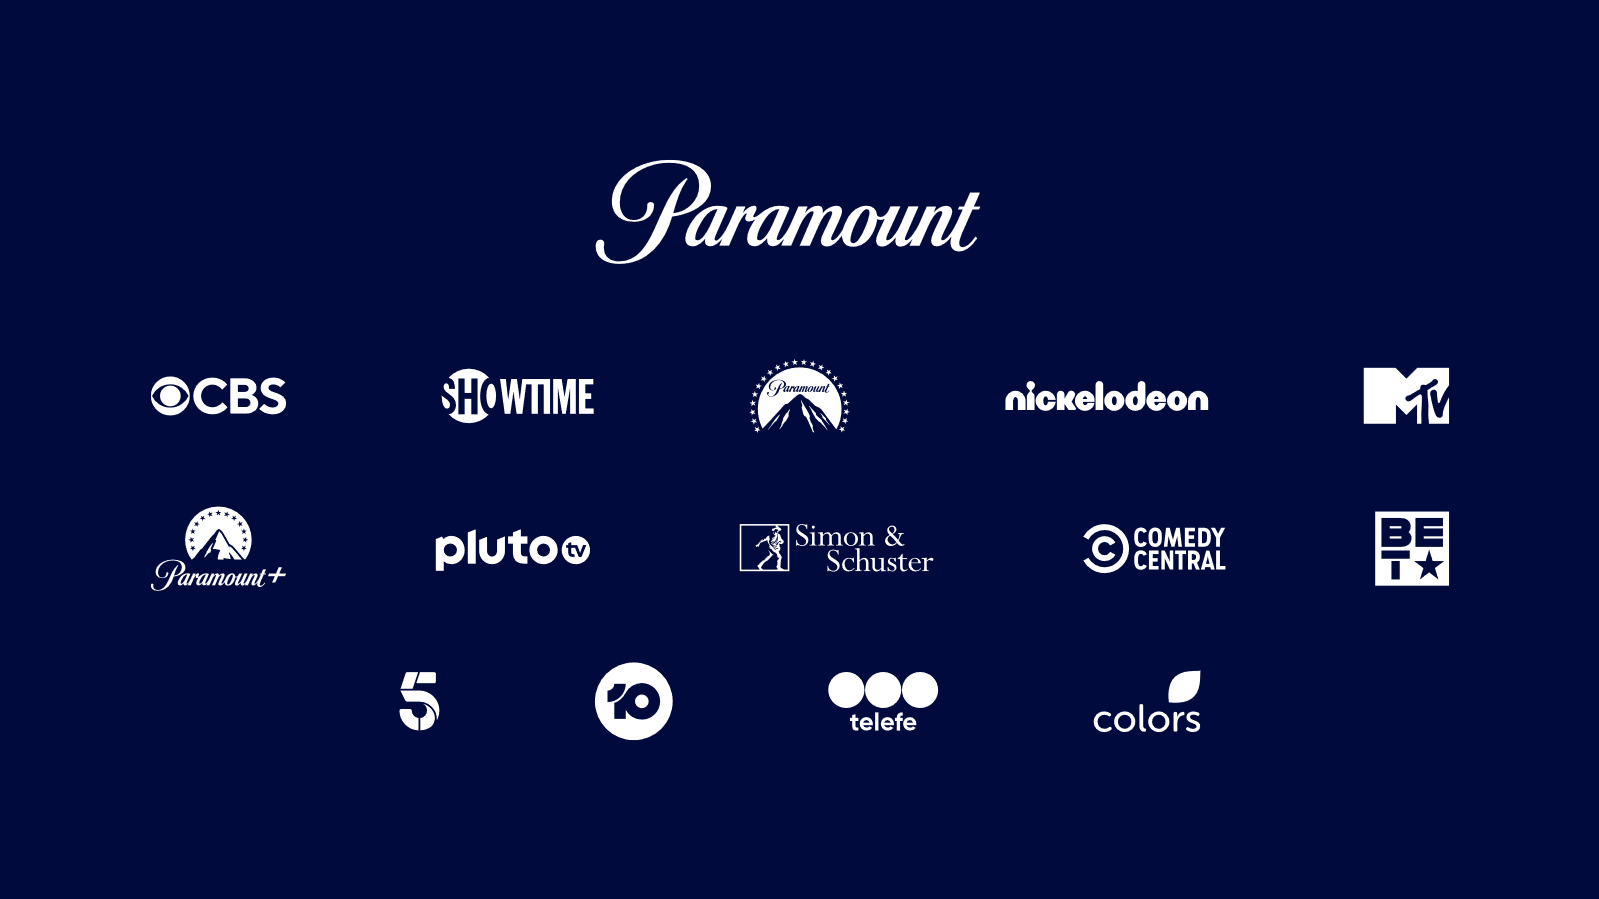 Paramount Global. Company assets